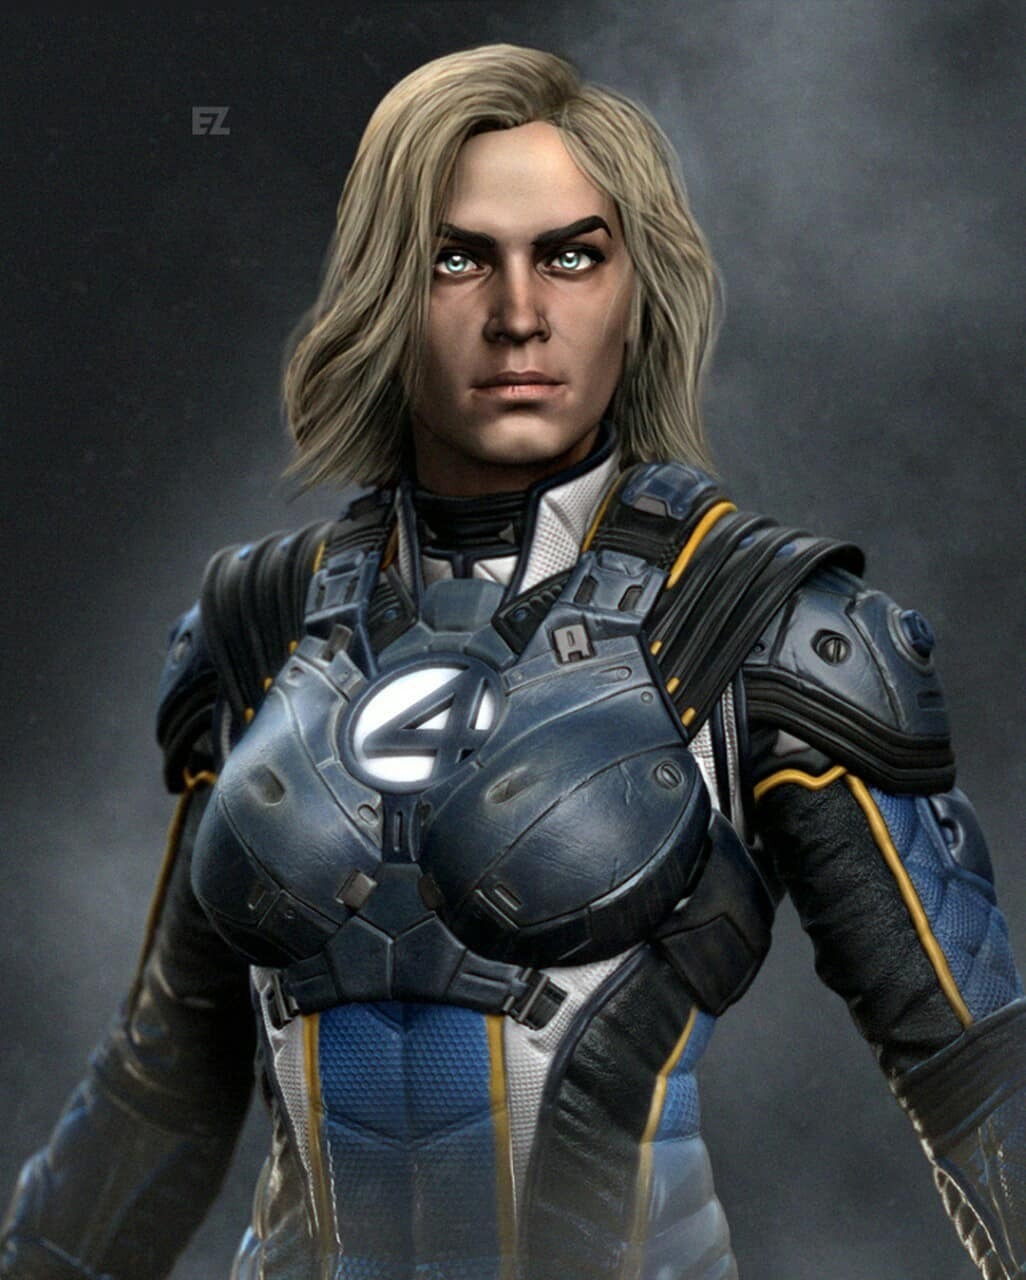 Invisible Woman screenshots, image and picture